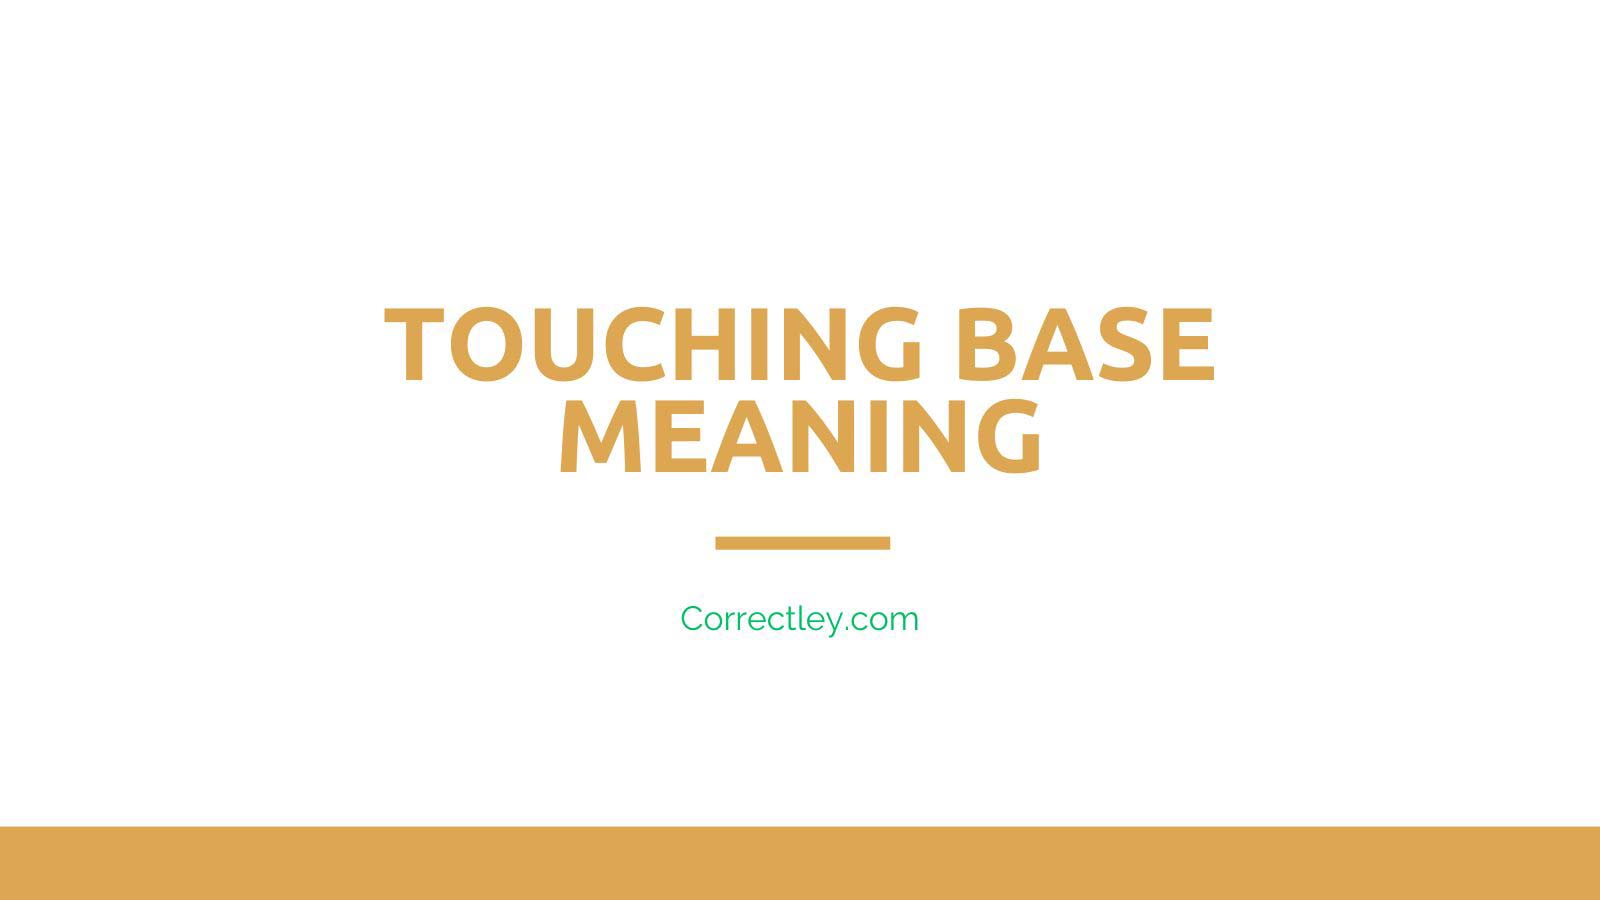 What Does Touching Base Mean